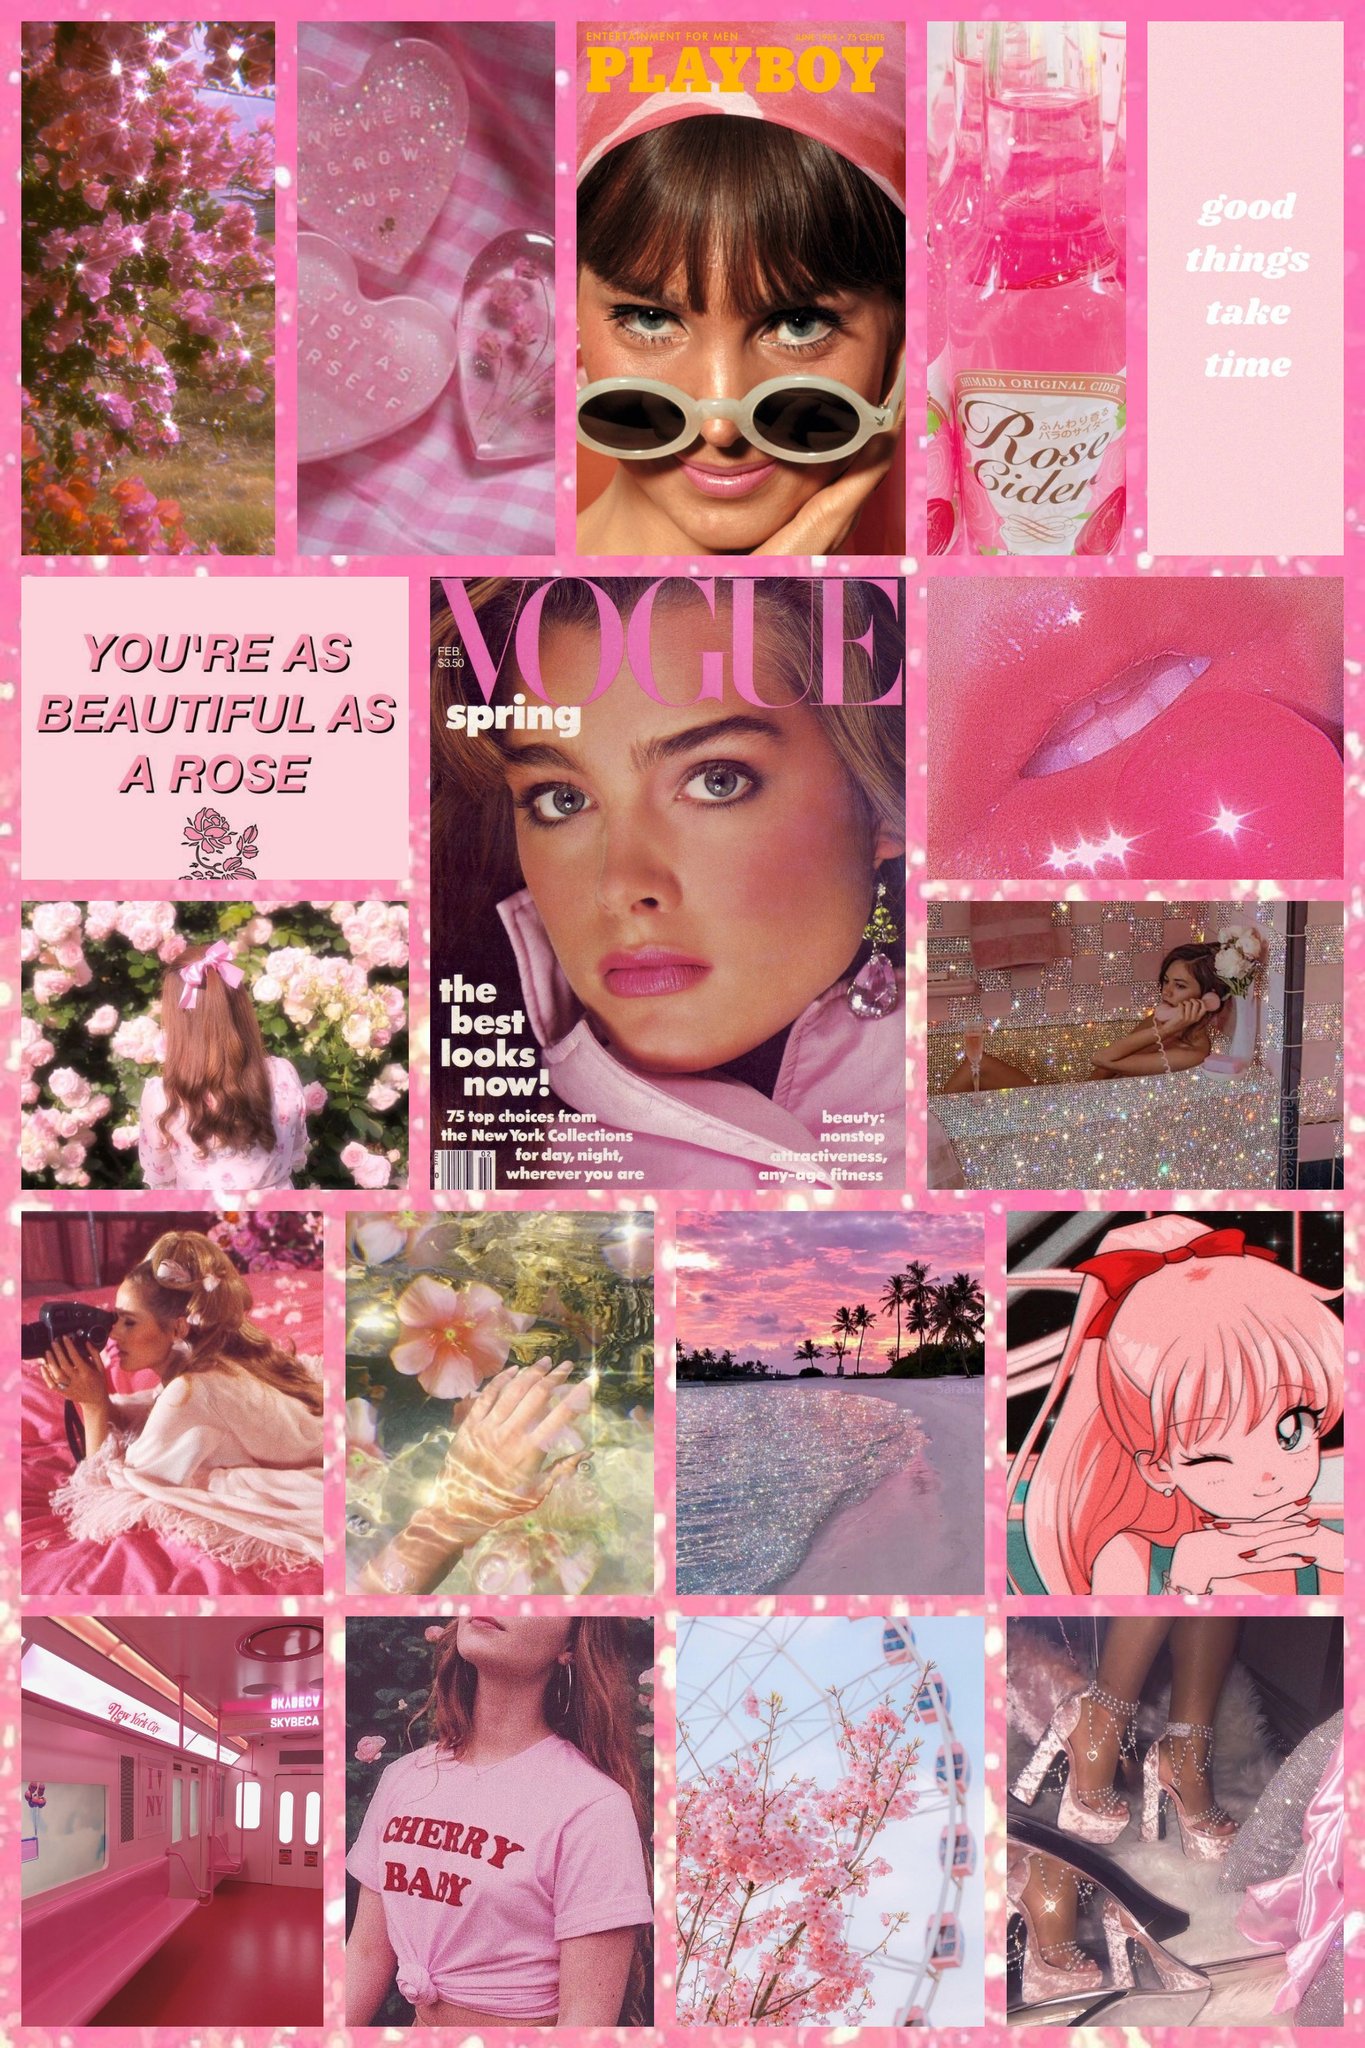 HALCYON🥀🦋 on X: The Pink Aesthetic. #pink #aesthetic #wallpaper #collage  #ａｅｓｔｈｅｔｉｃ #aestheticedits #aesthetics #aesthetic_photos  #aestheticwallpapers #vogue #playboy #aestheticflowers #aestheticfood  #fashion #makeup